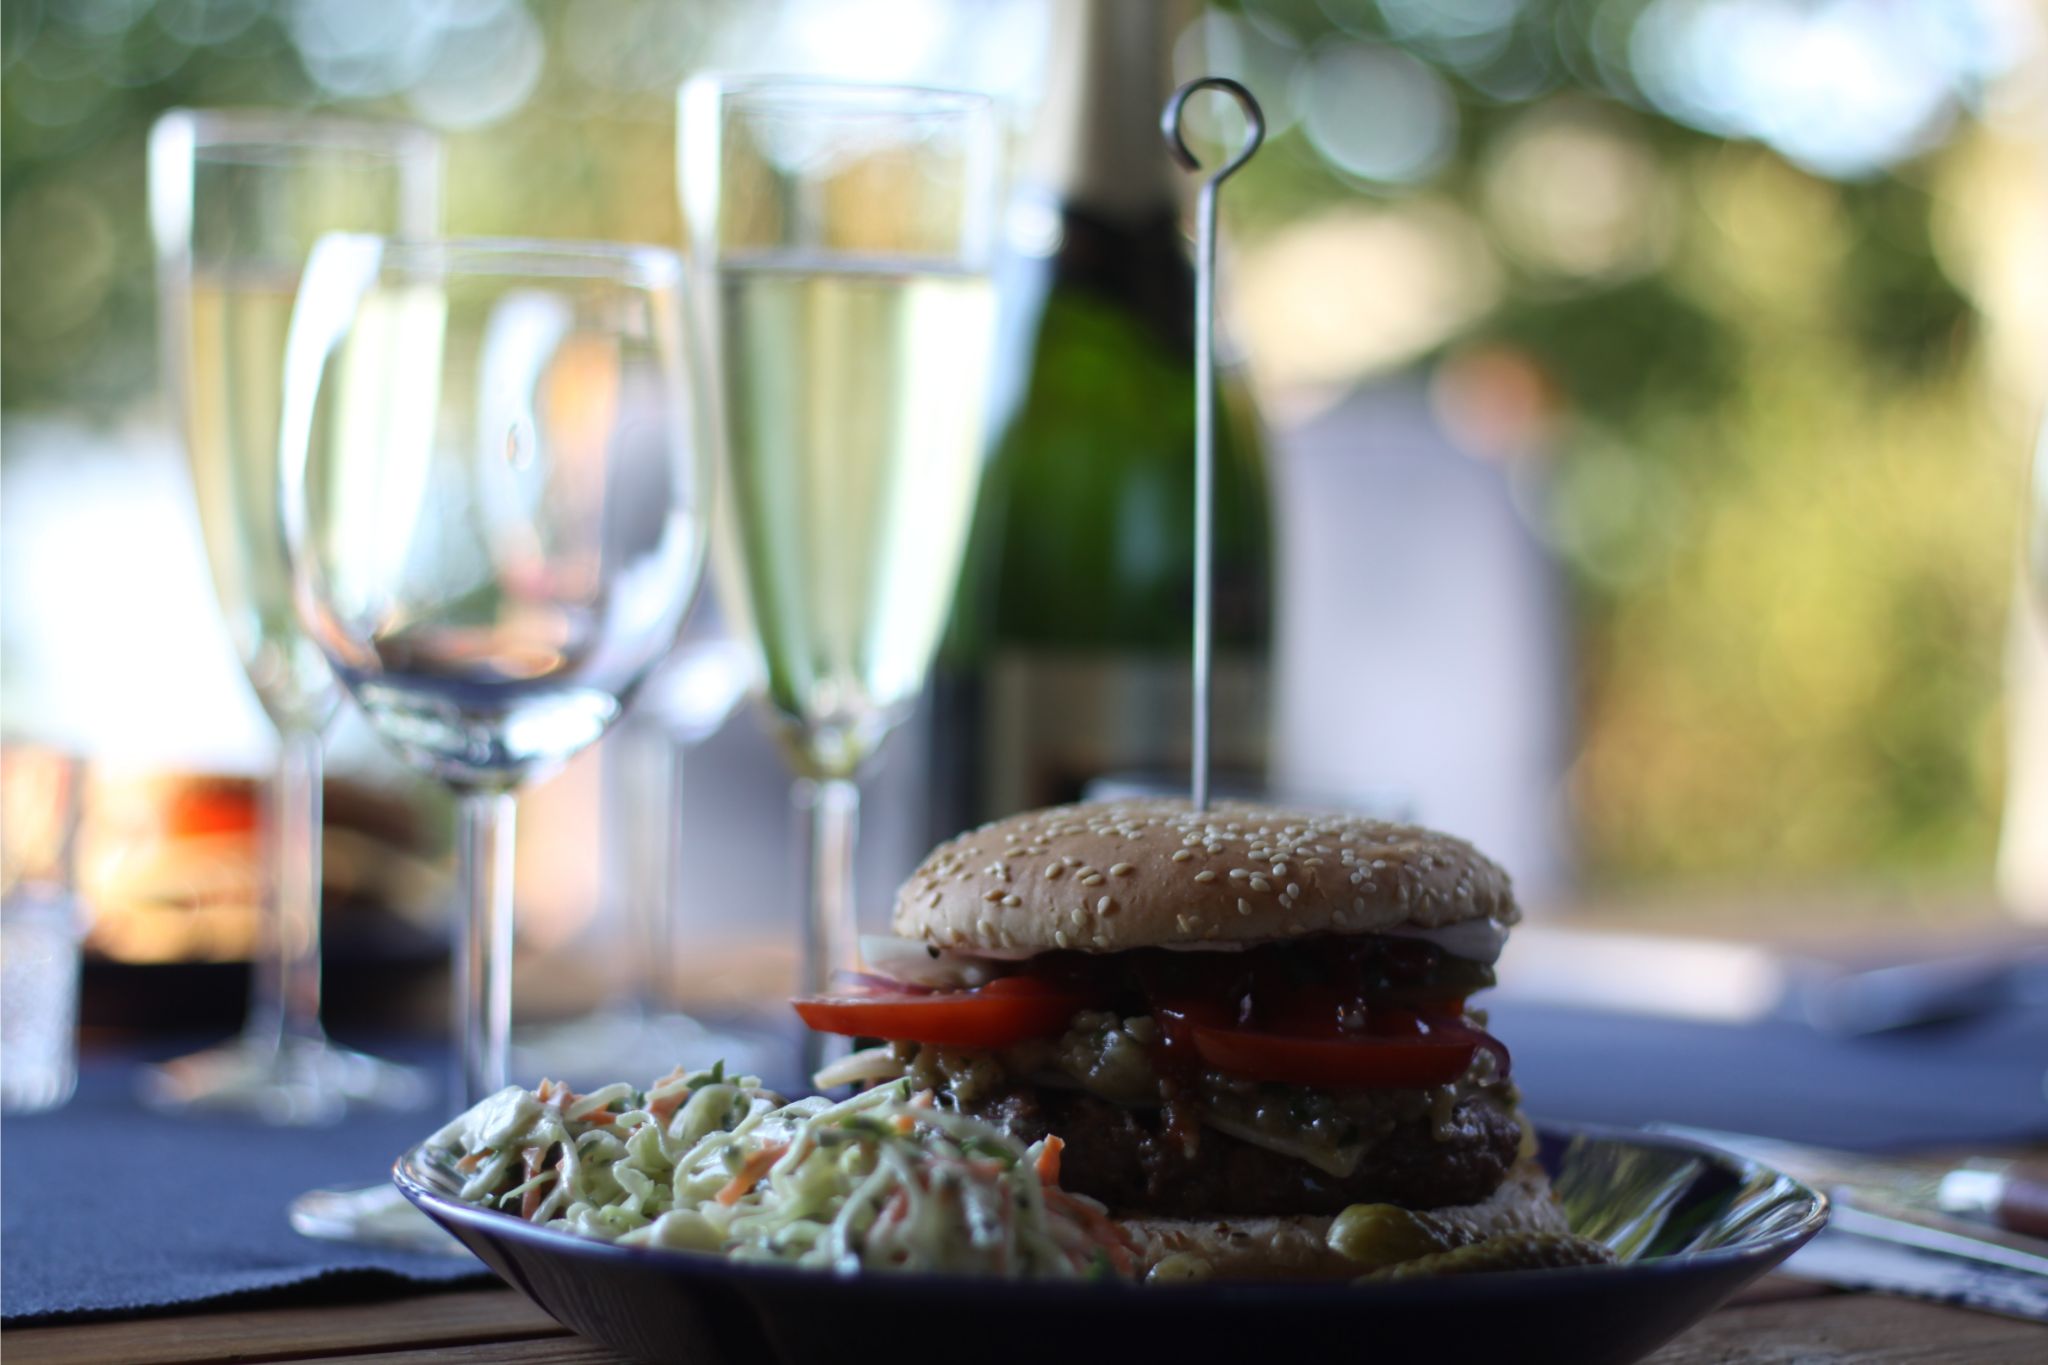 Homemade burgers and champagne